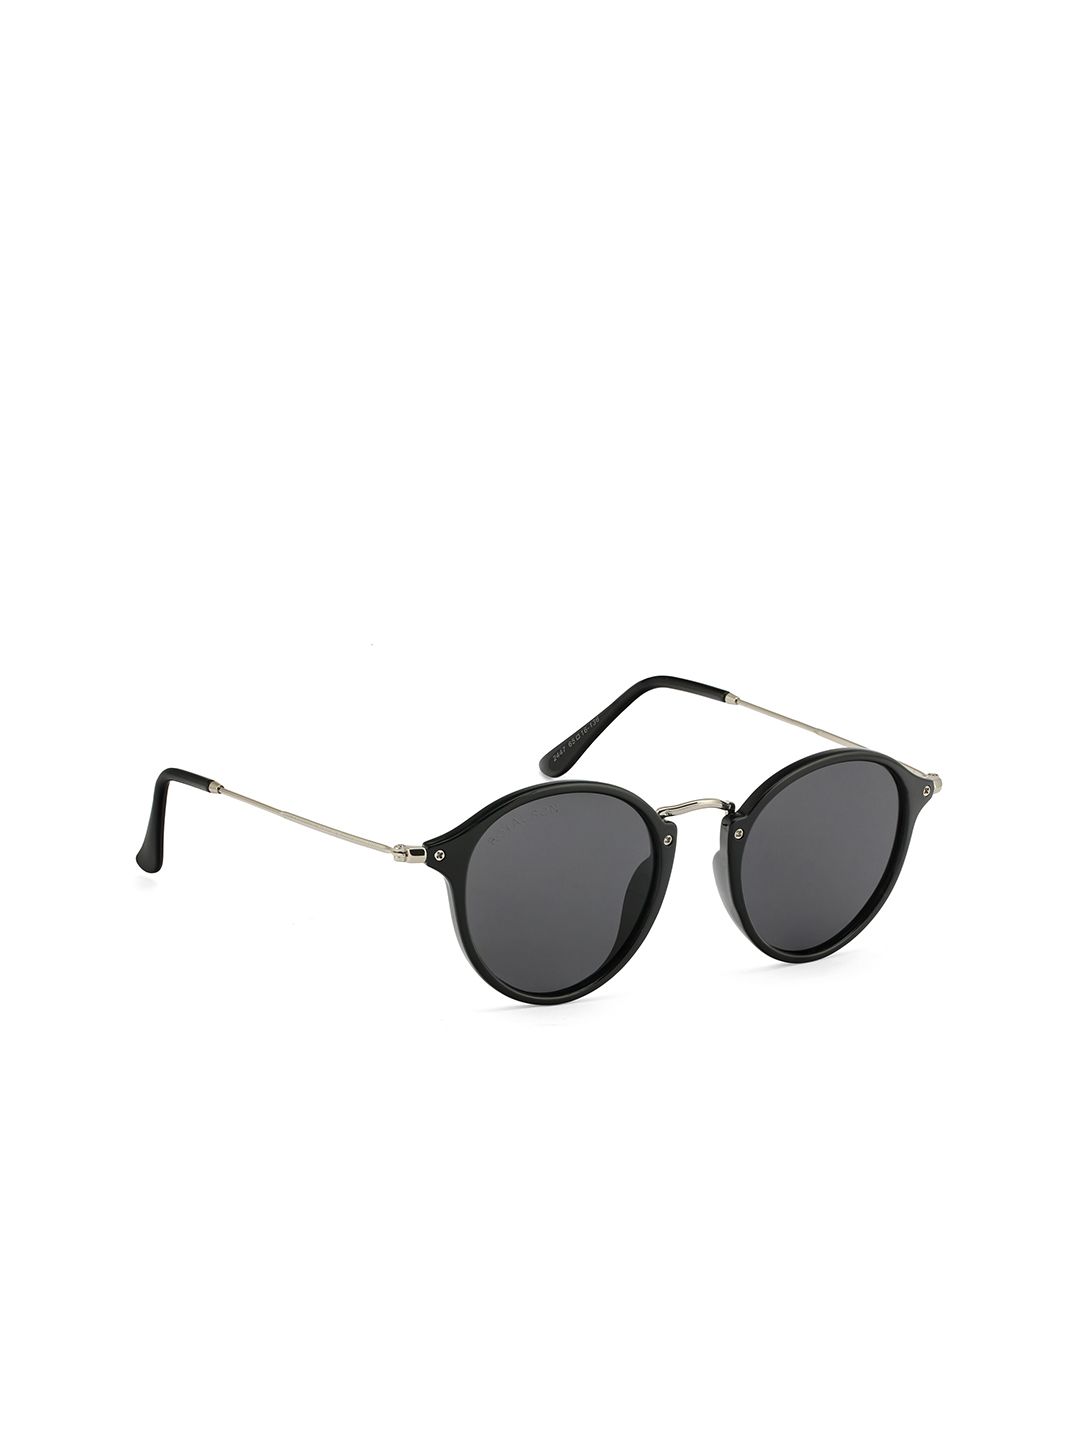 ROYAL SON Unisex Black Lens & Black Round Sunglasses with UV Protected Lens Price in India